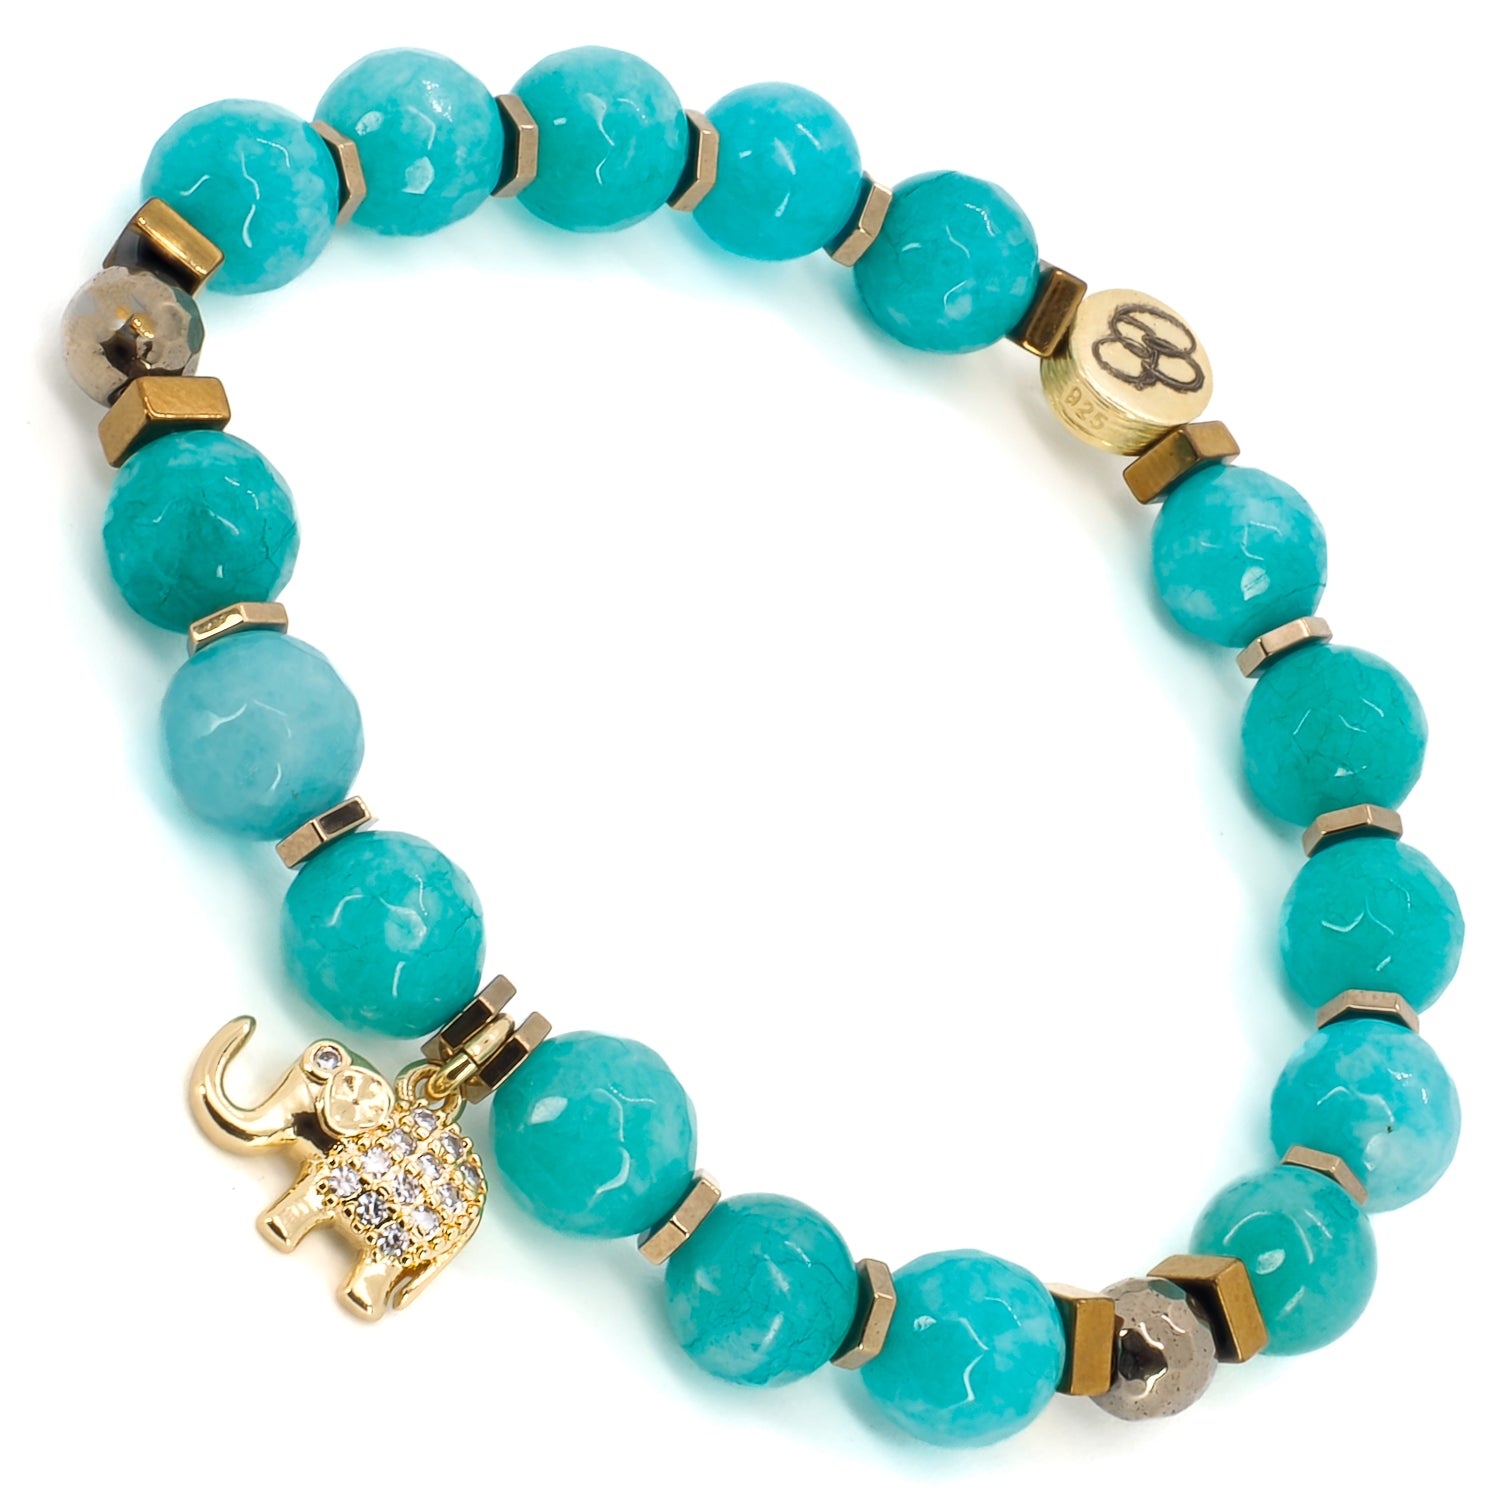 Stunning Amazonite stone beads and sparkling zircon stones create a unique and meaningful piece